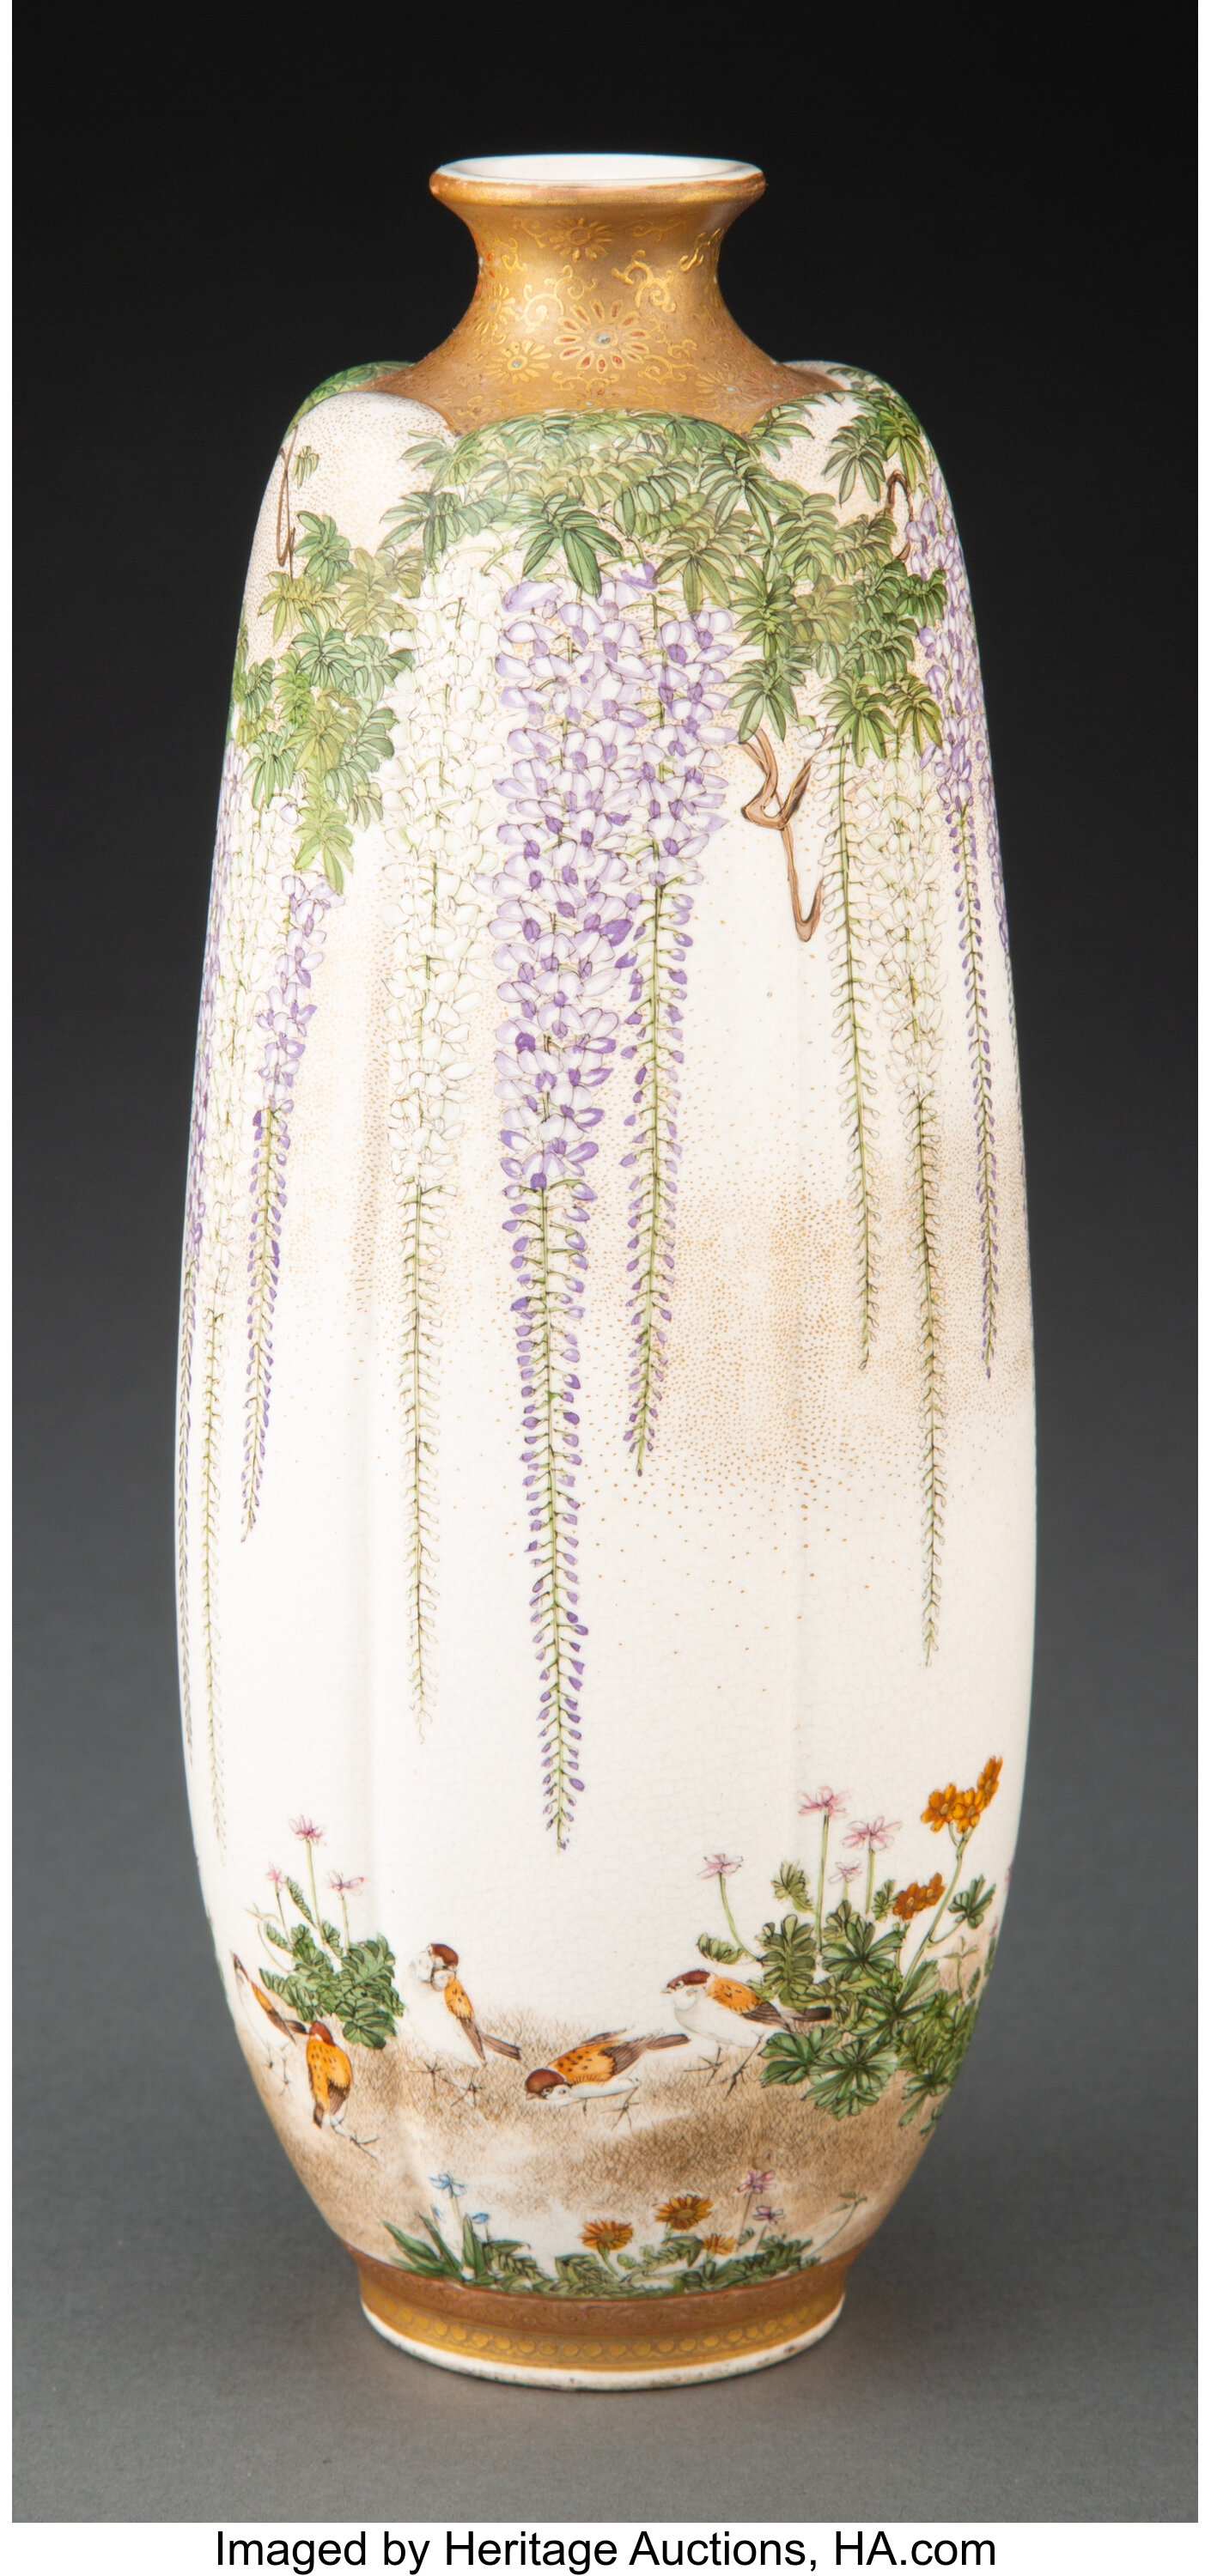 Japanese Vases for Sale at Online Auction